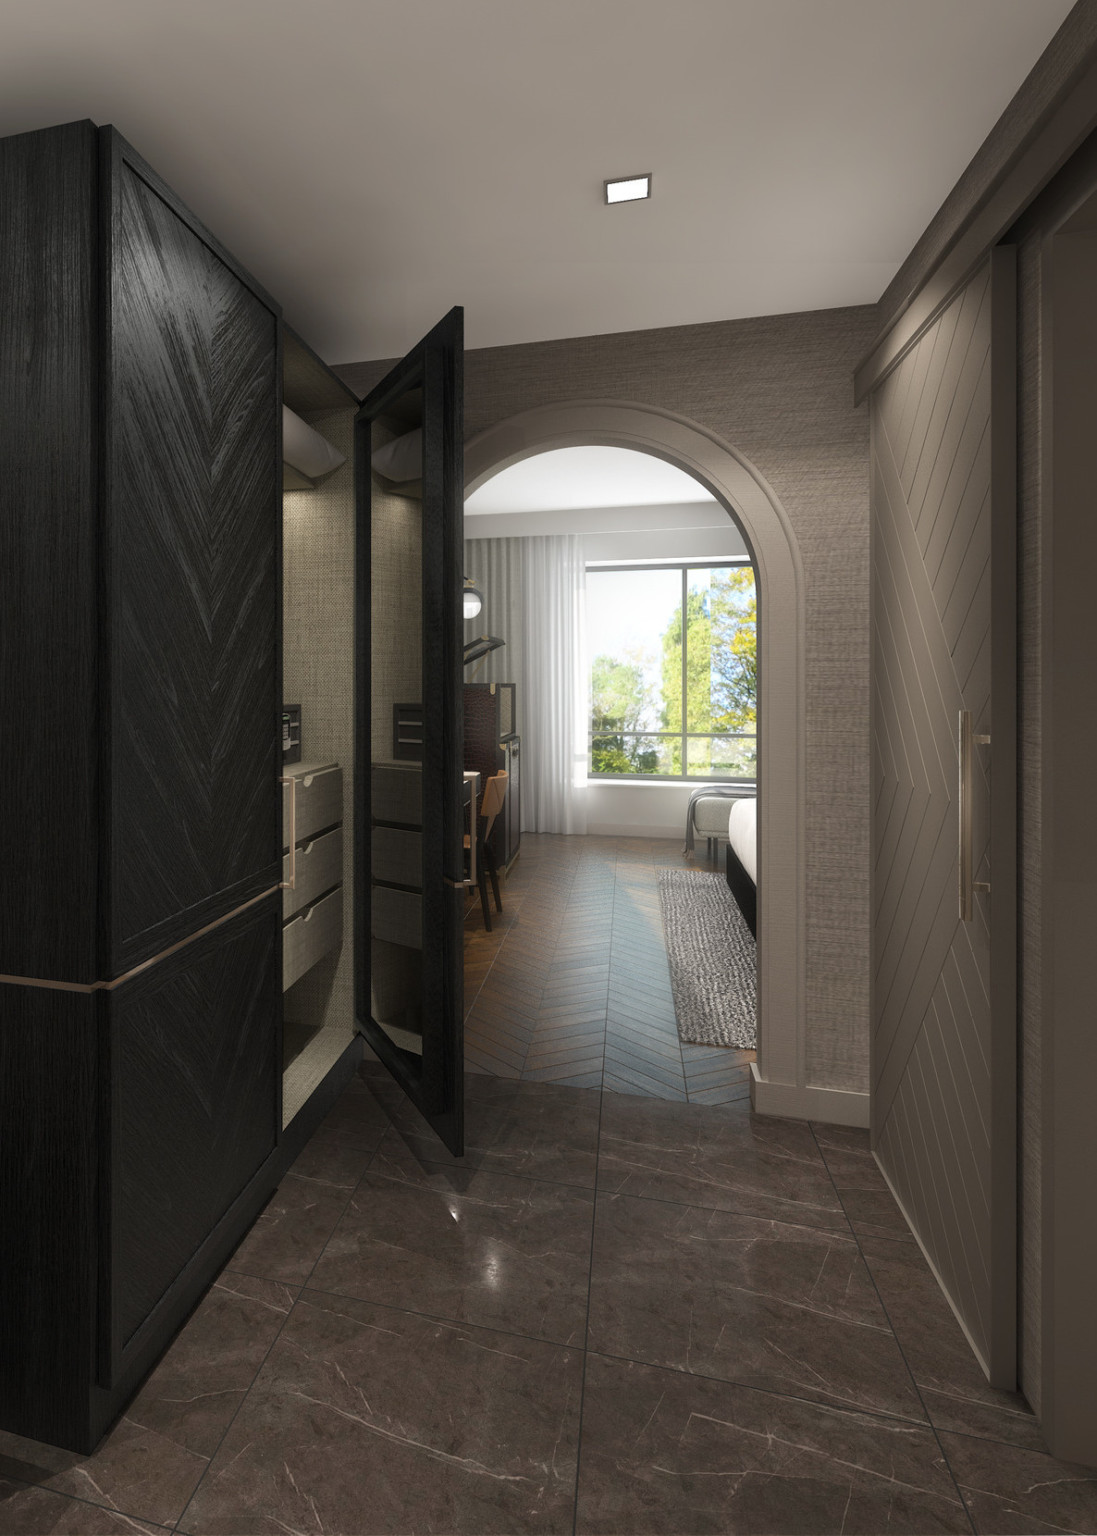 Entry hallway into guest room with arched doorway divider. Black wood cabinet with 1 door open, revealing full length mirror